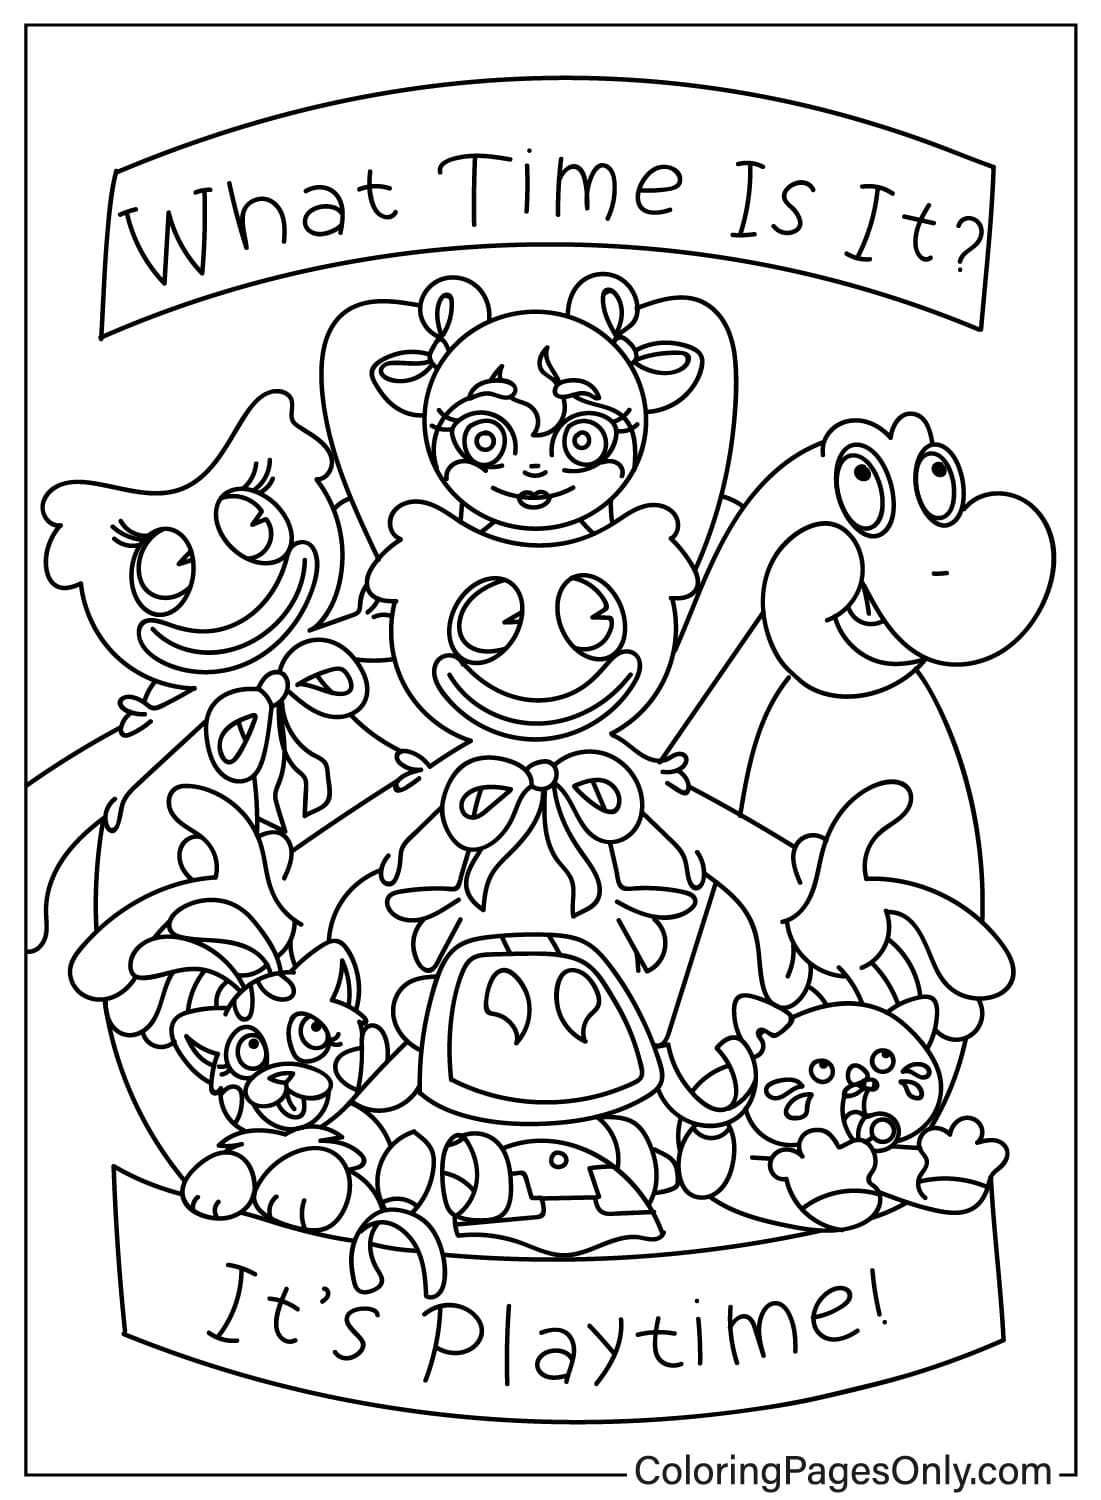 Poppy Playtime Images Coloring Page from Poppy Playtime